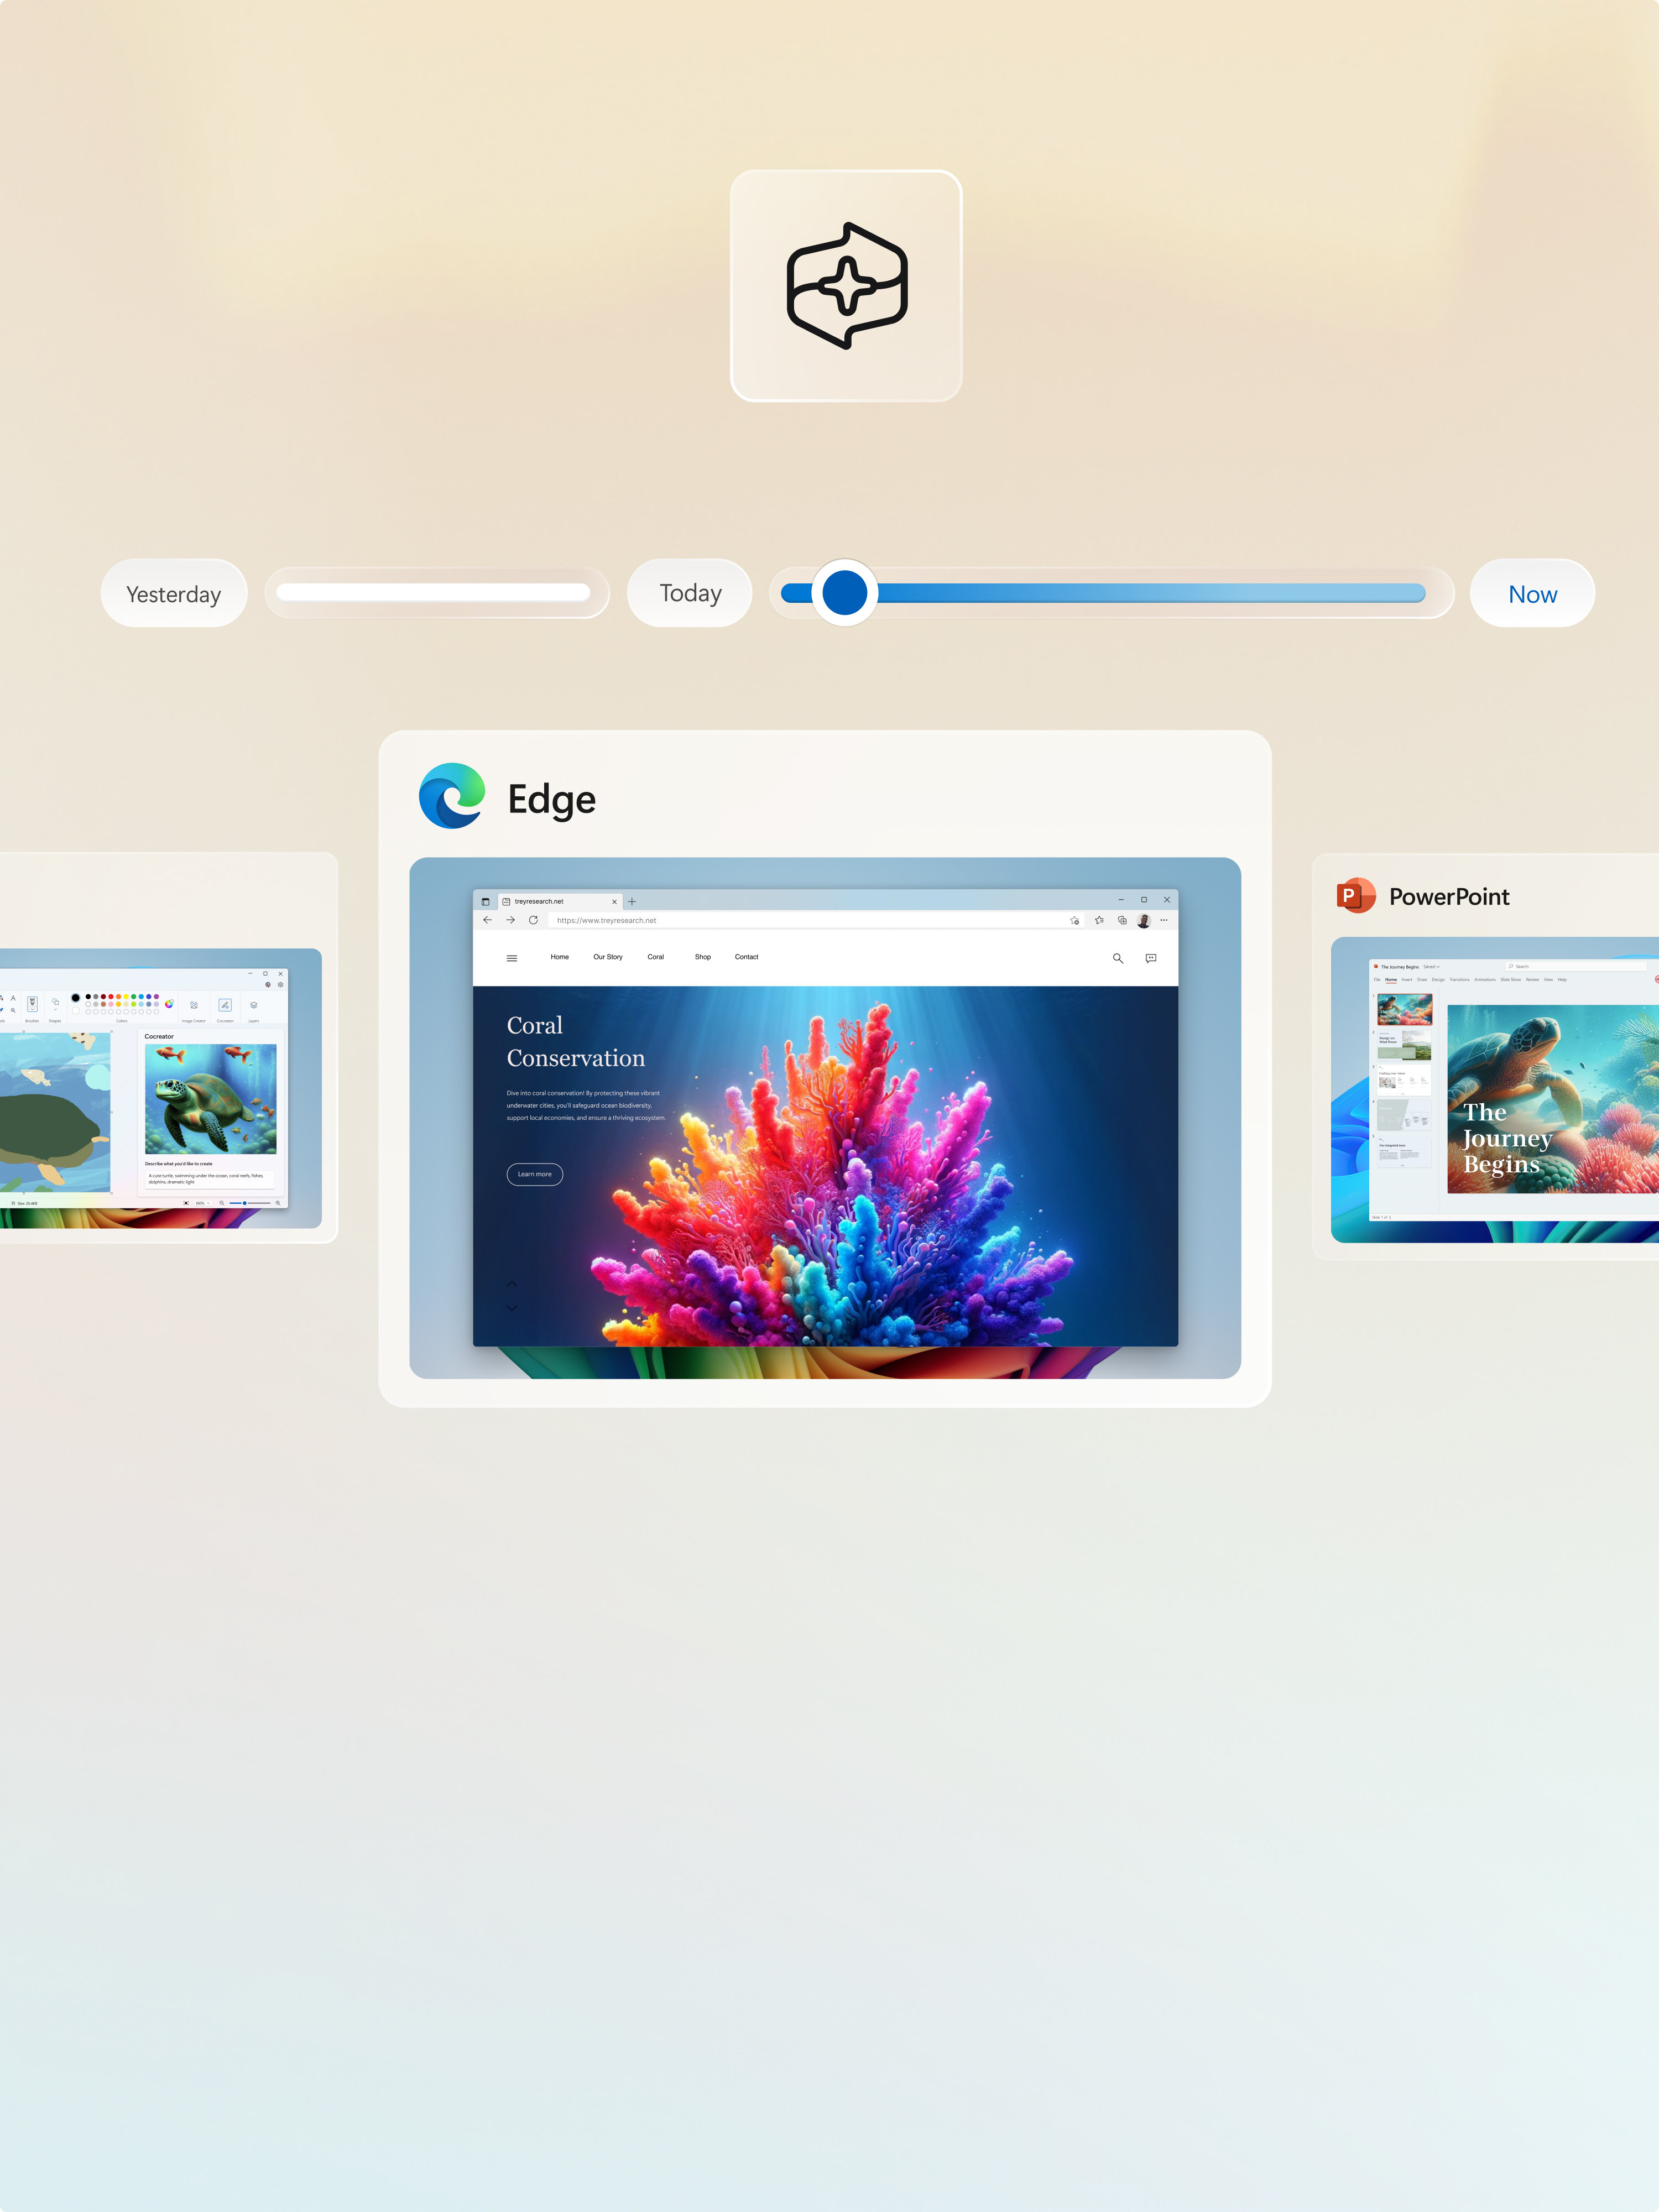 A PowerPoint window and two Microsoft Edge windows